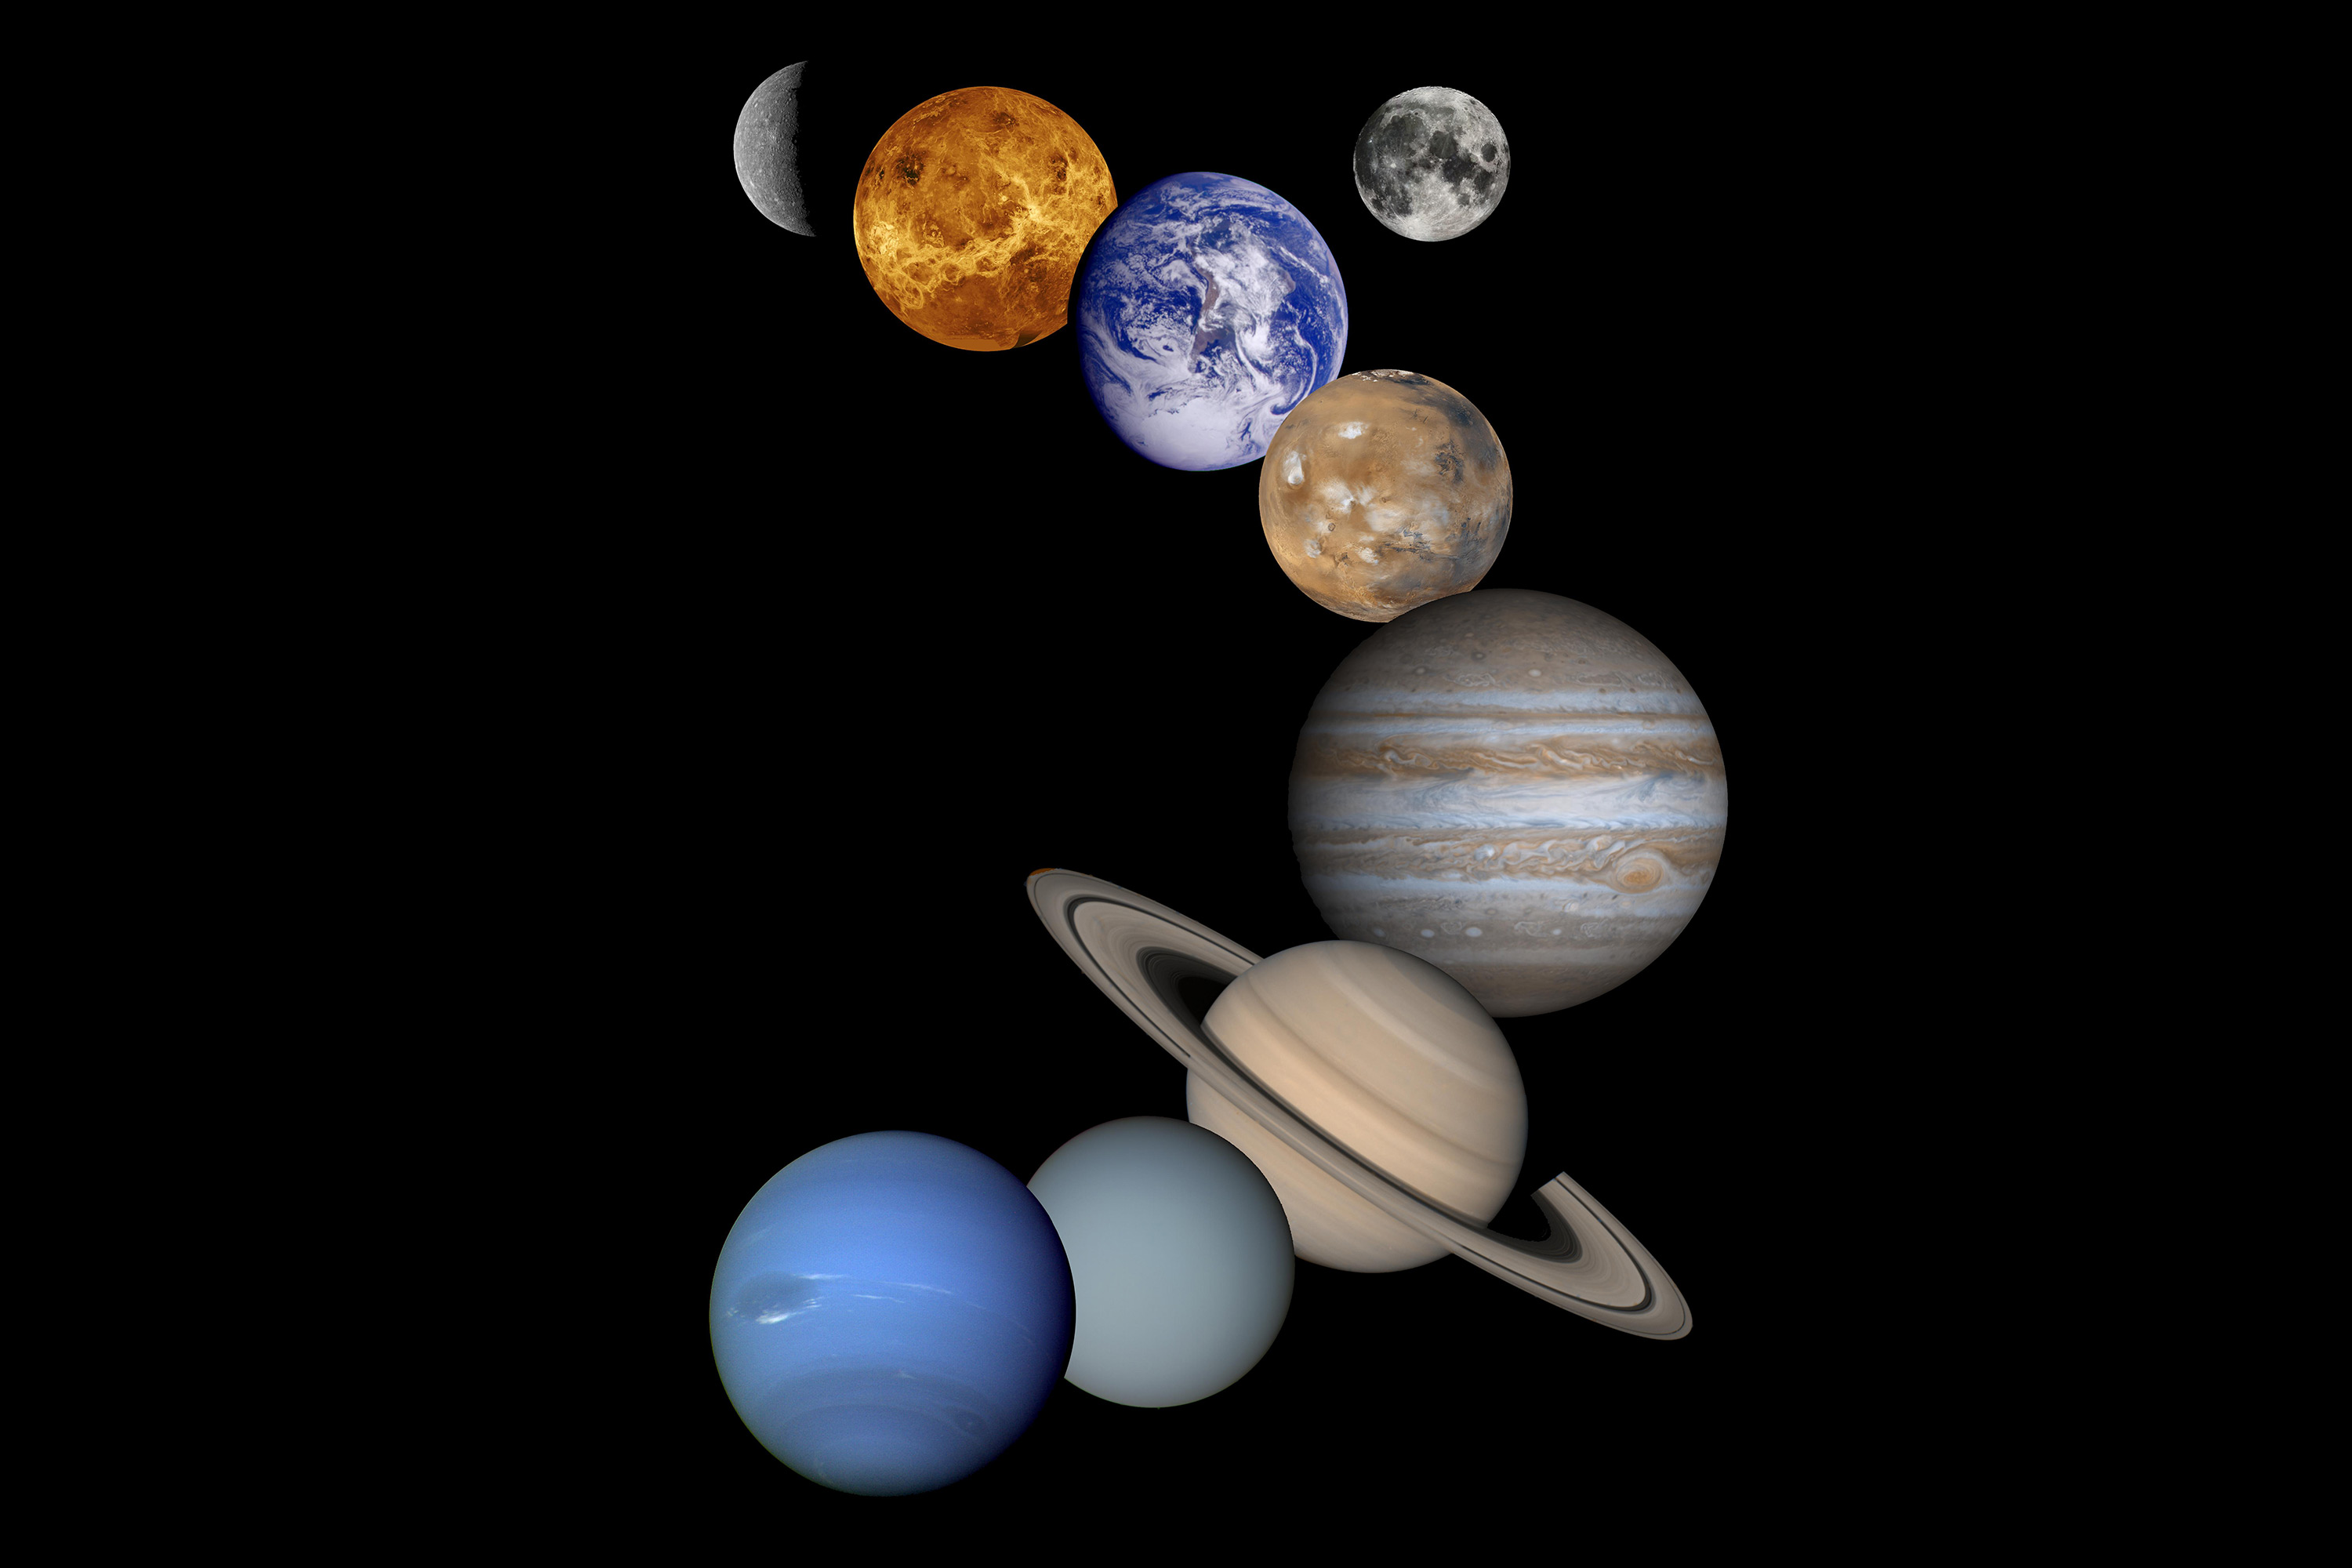 print out label the planets